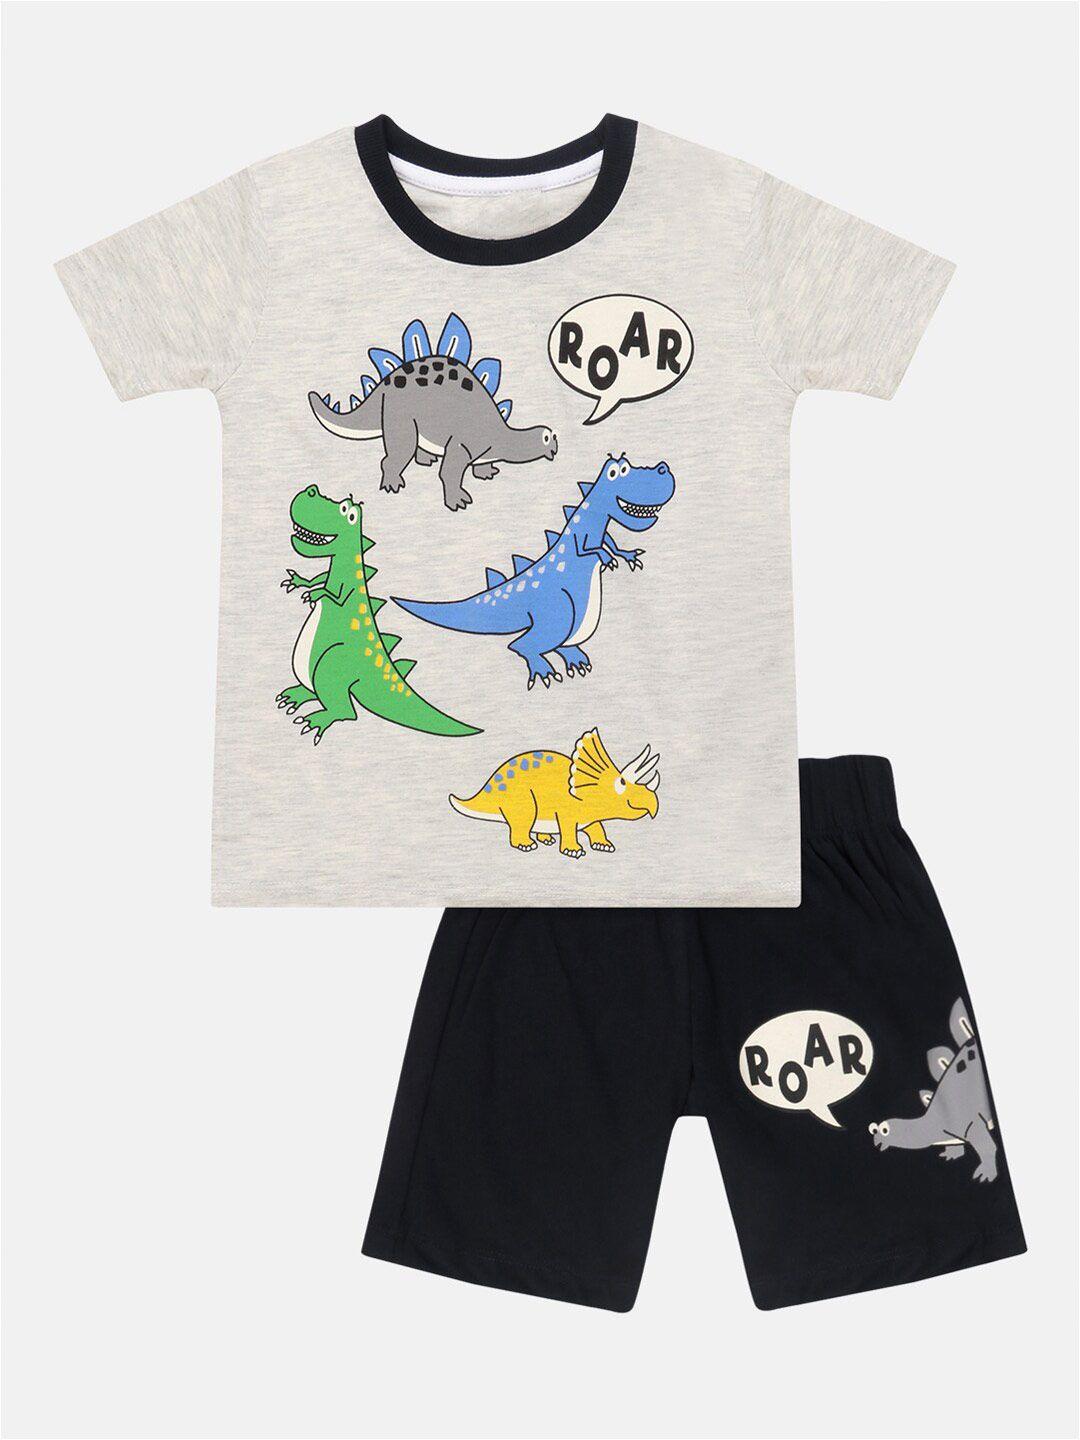 yk boys graphic printed short sleeves t-shirt with shorts